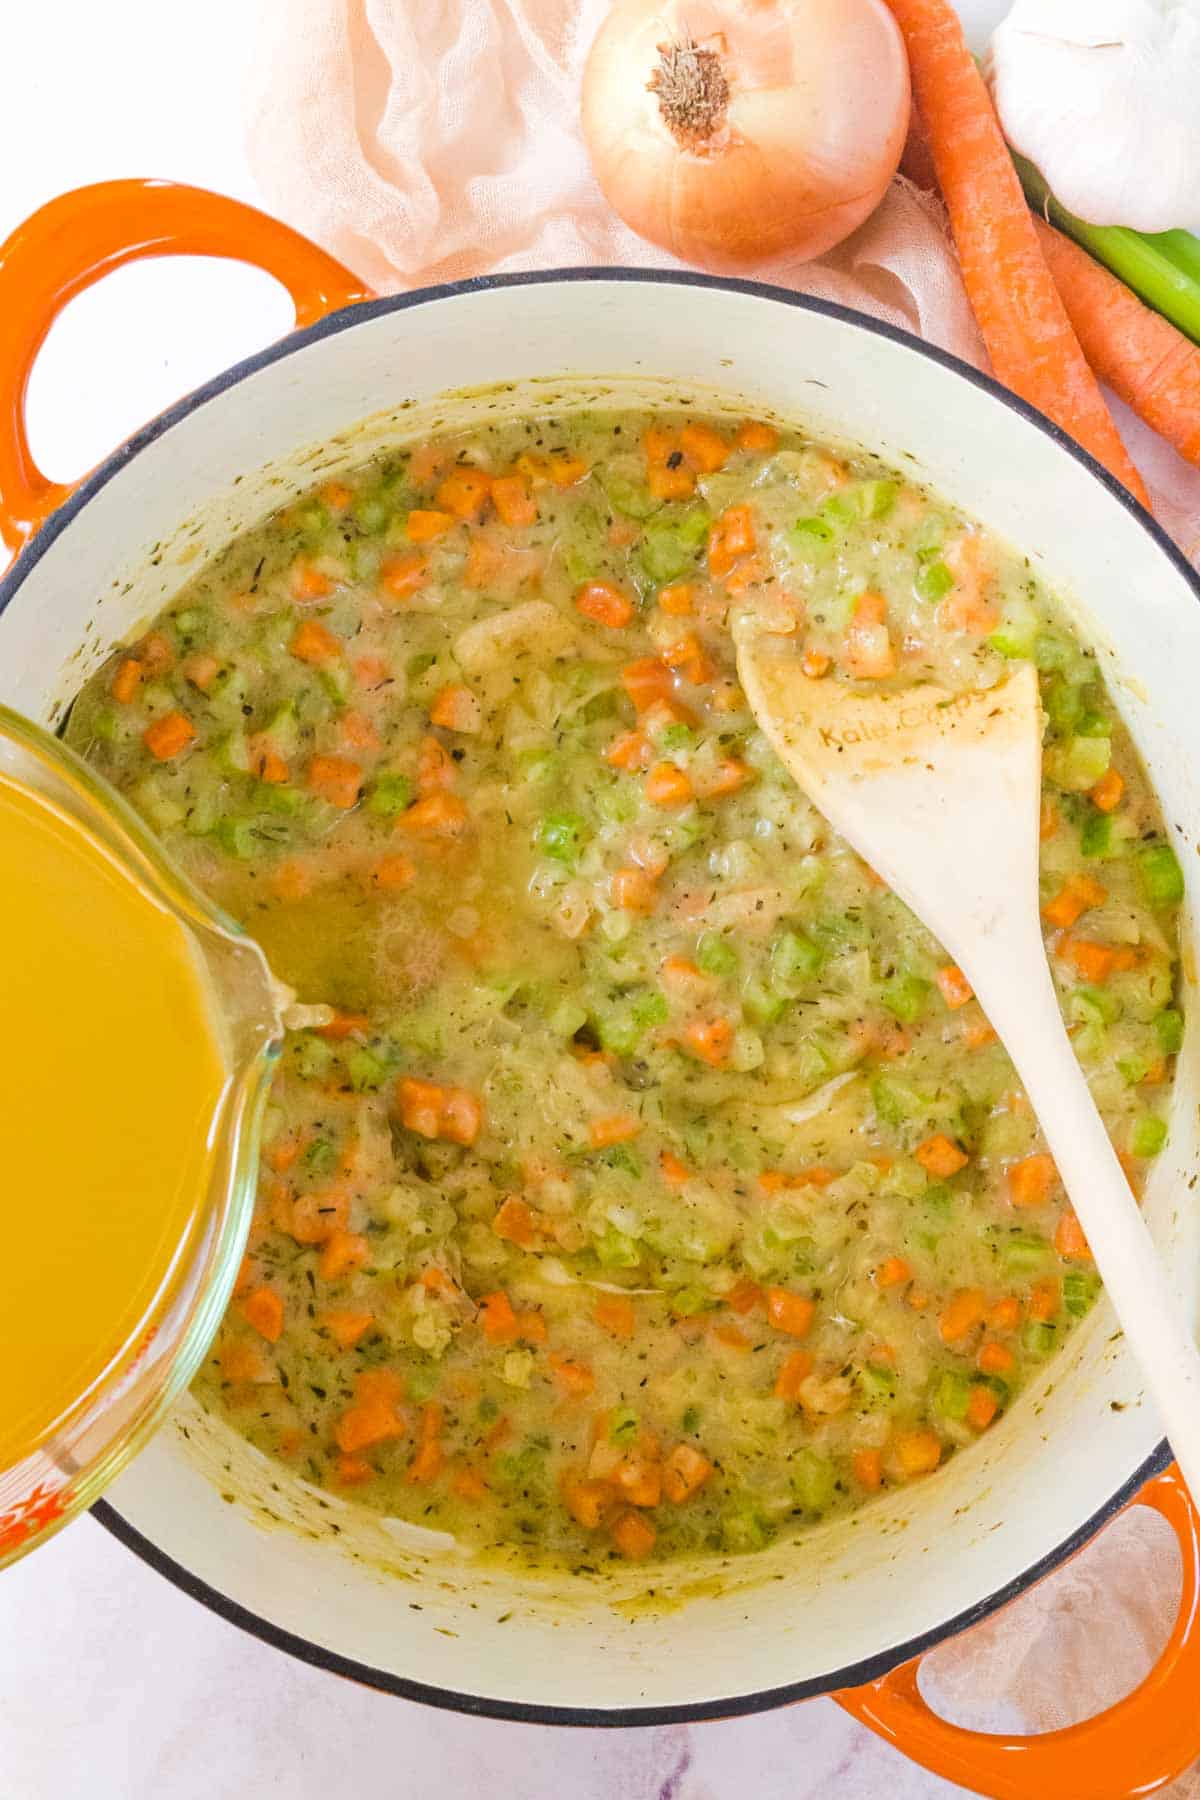 Chicken broth is added into the pot with sauted vegetables.